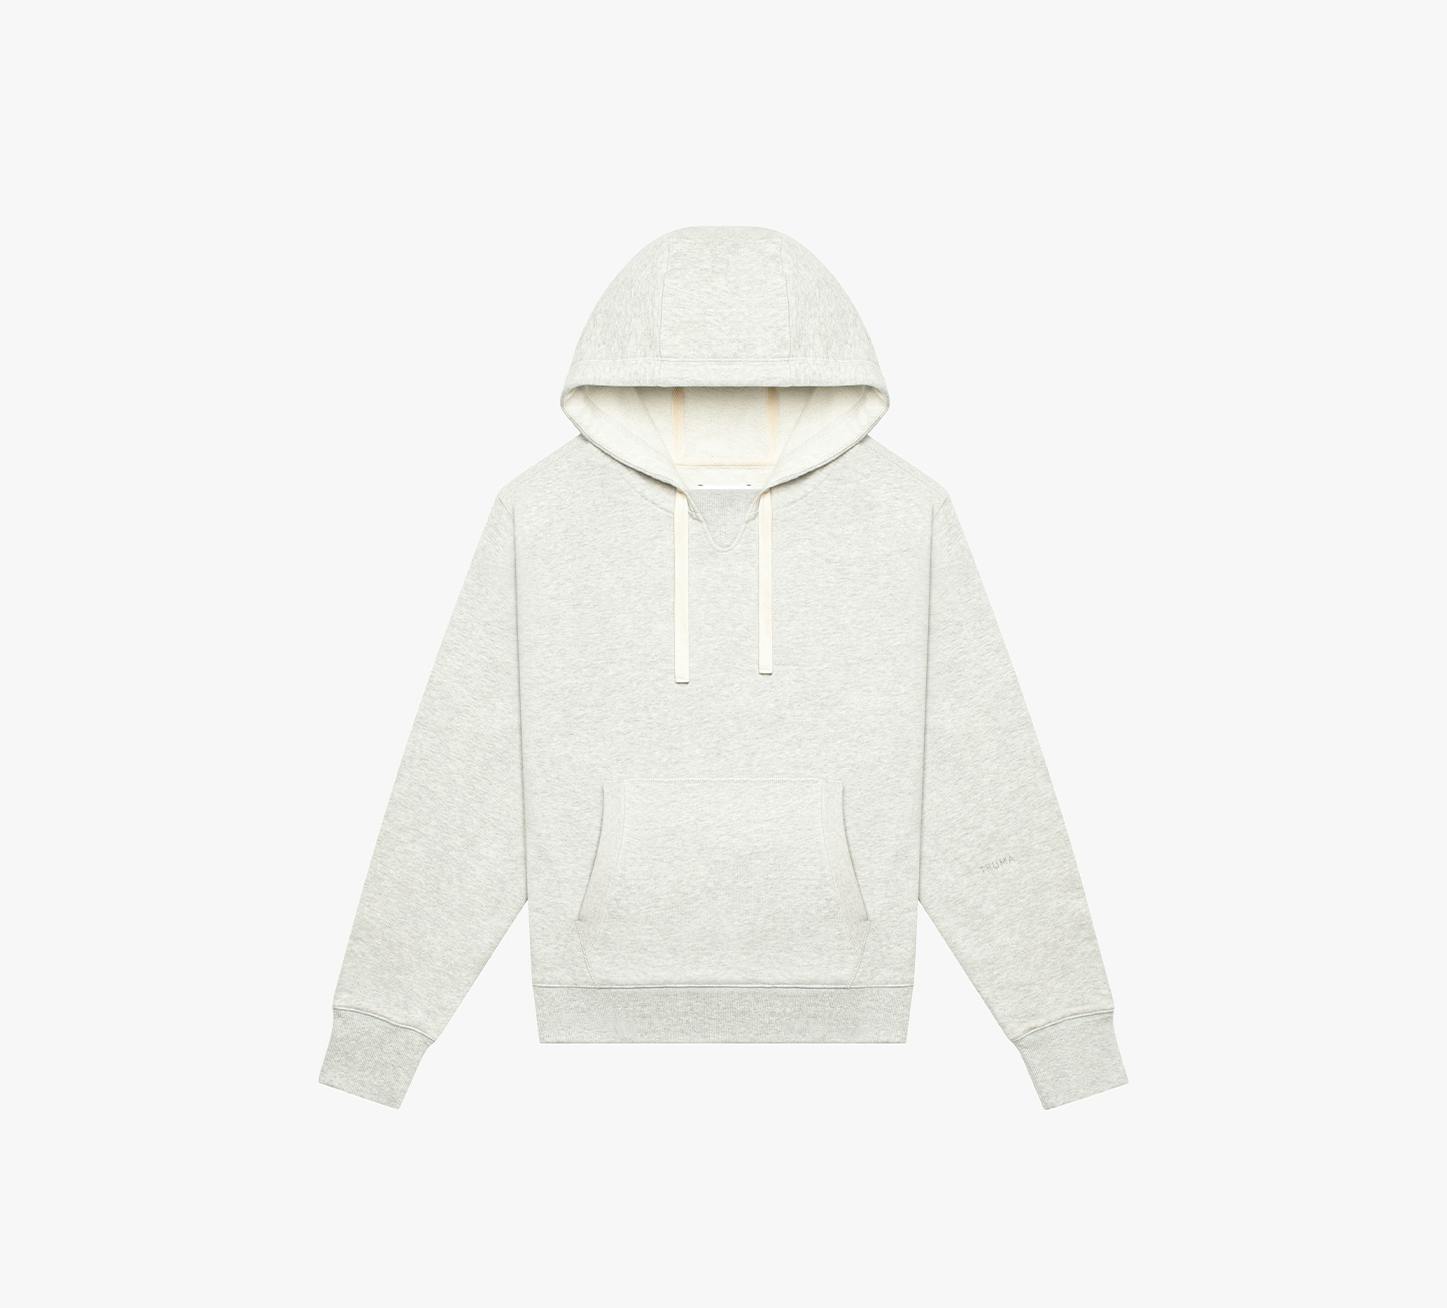 Lounge & Leisure Hoodie (Women's Fit / Oatmeal) - Front 